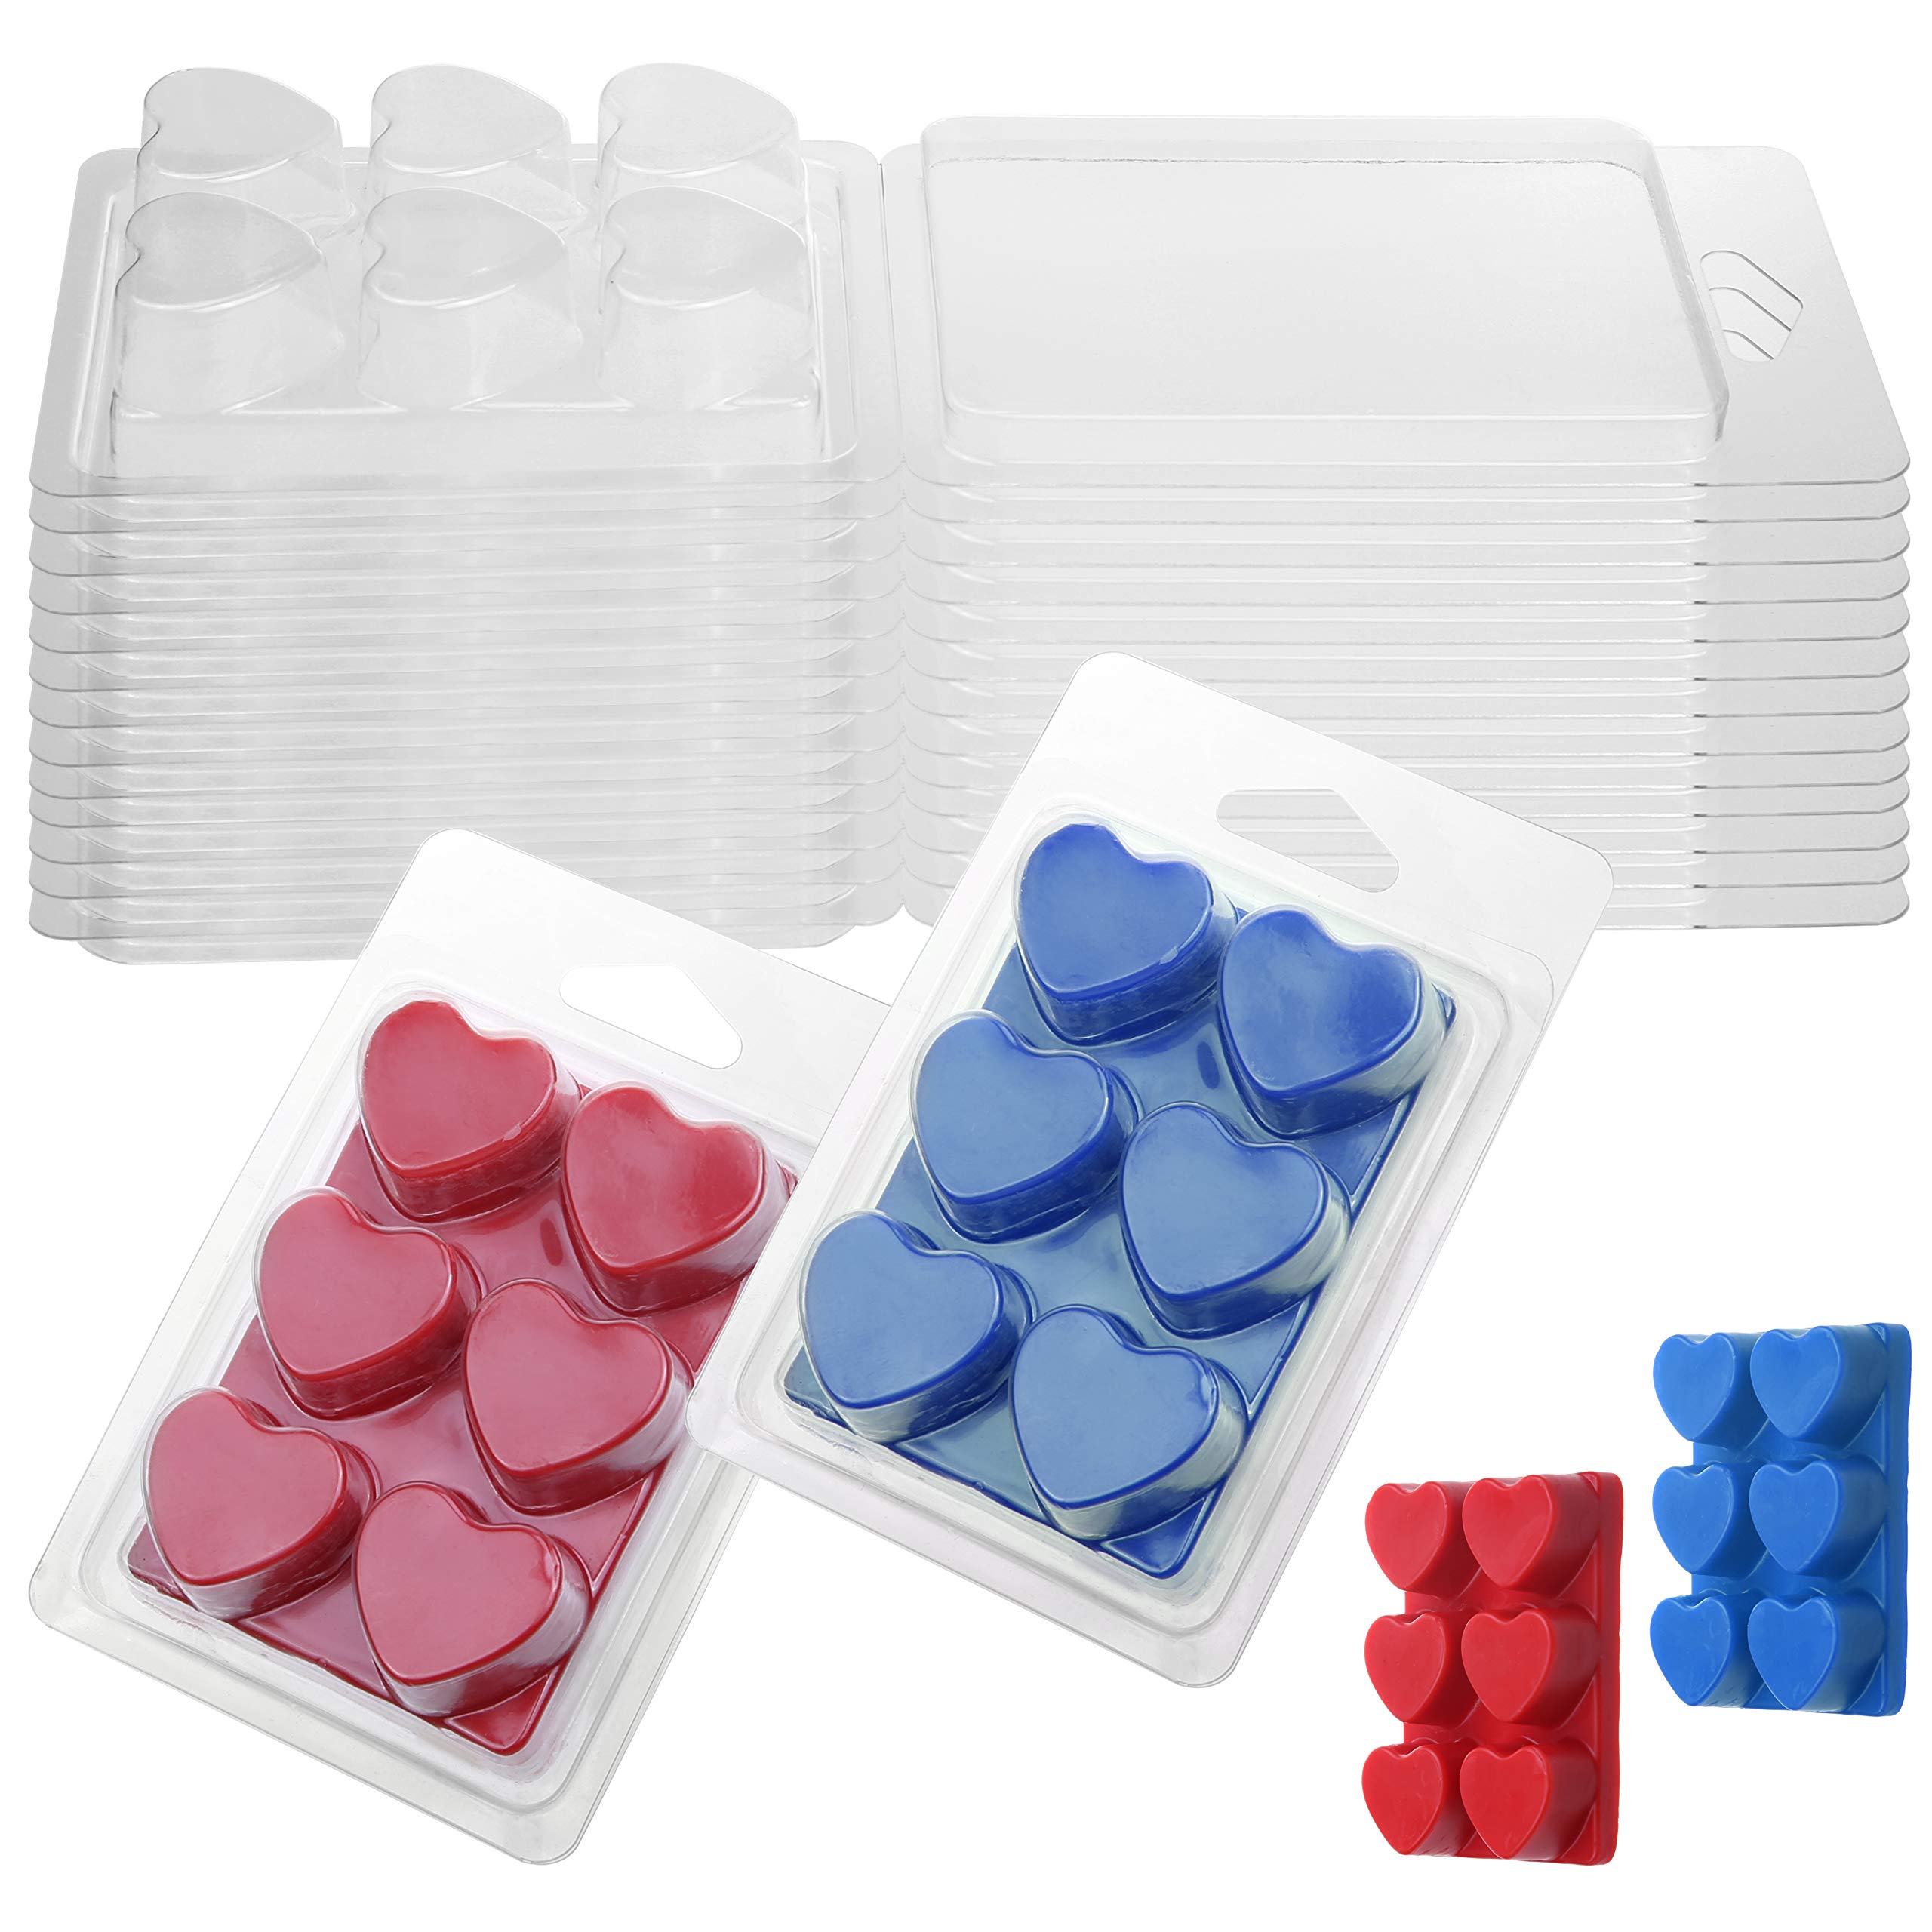 25 X Clamshell Wax Melt Plastic Boxes. FIVER !!